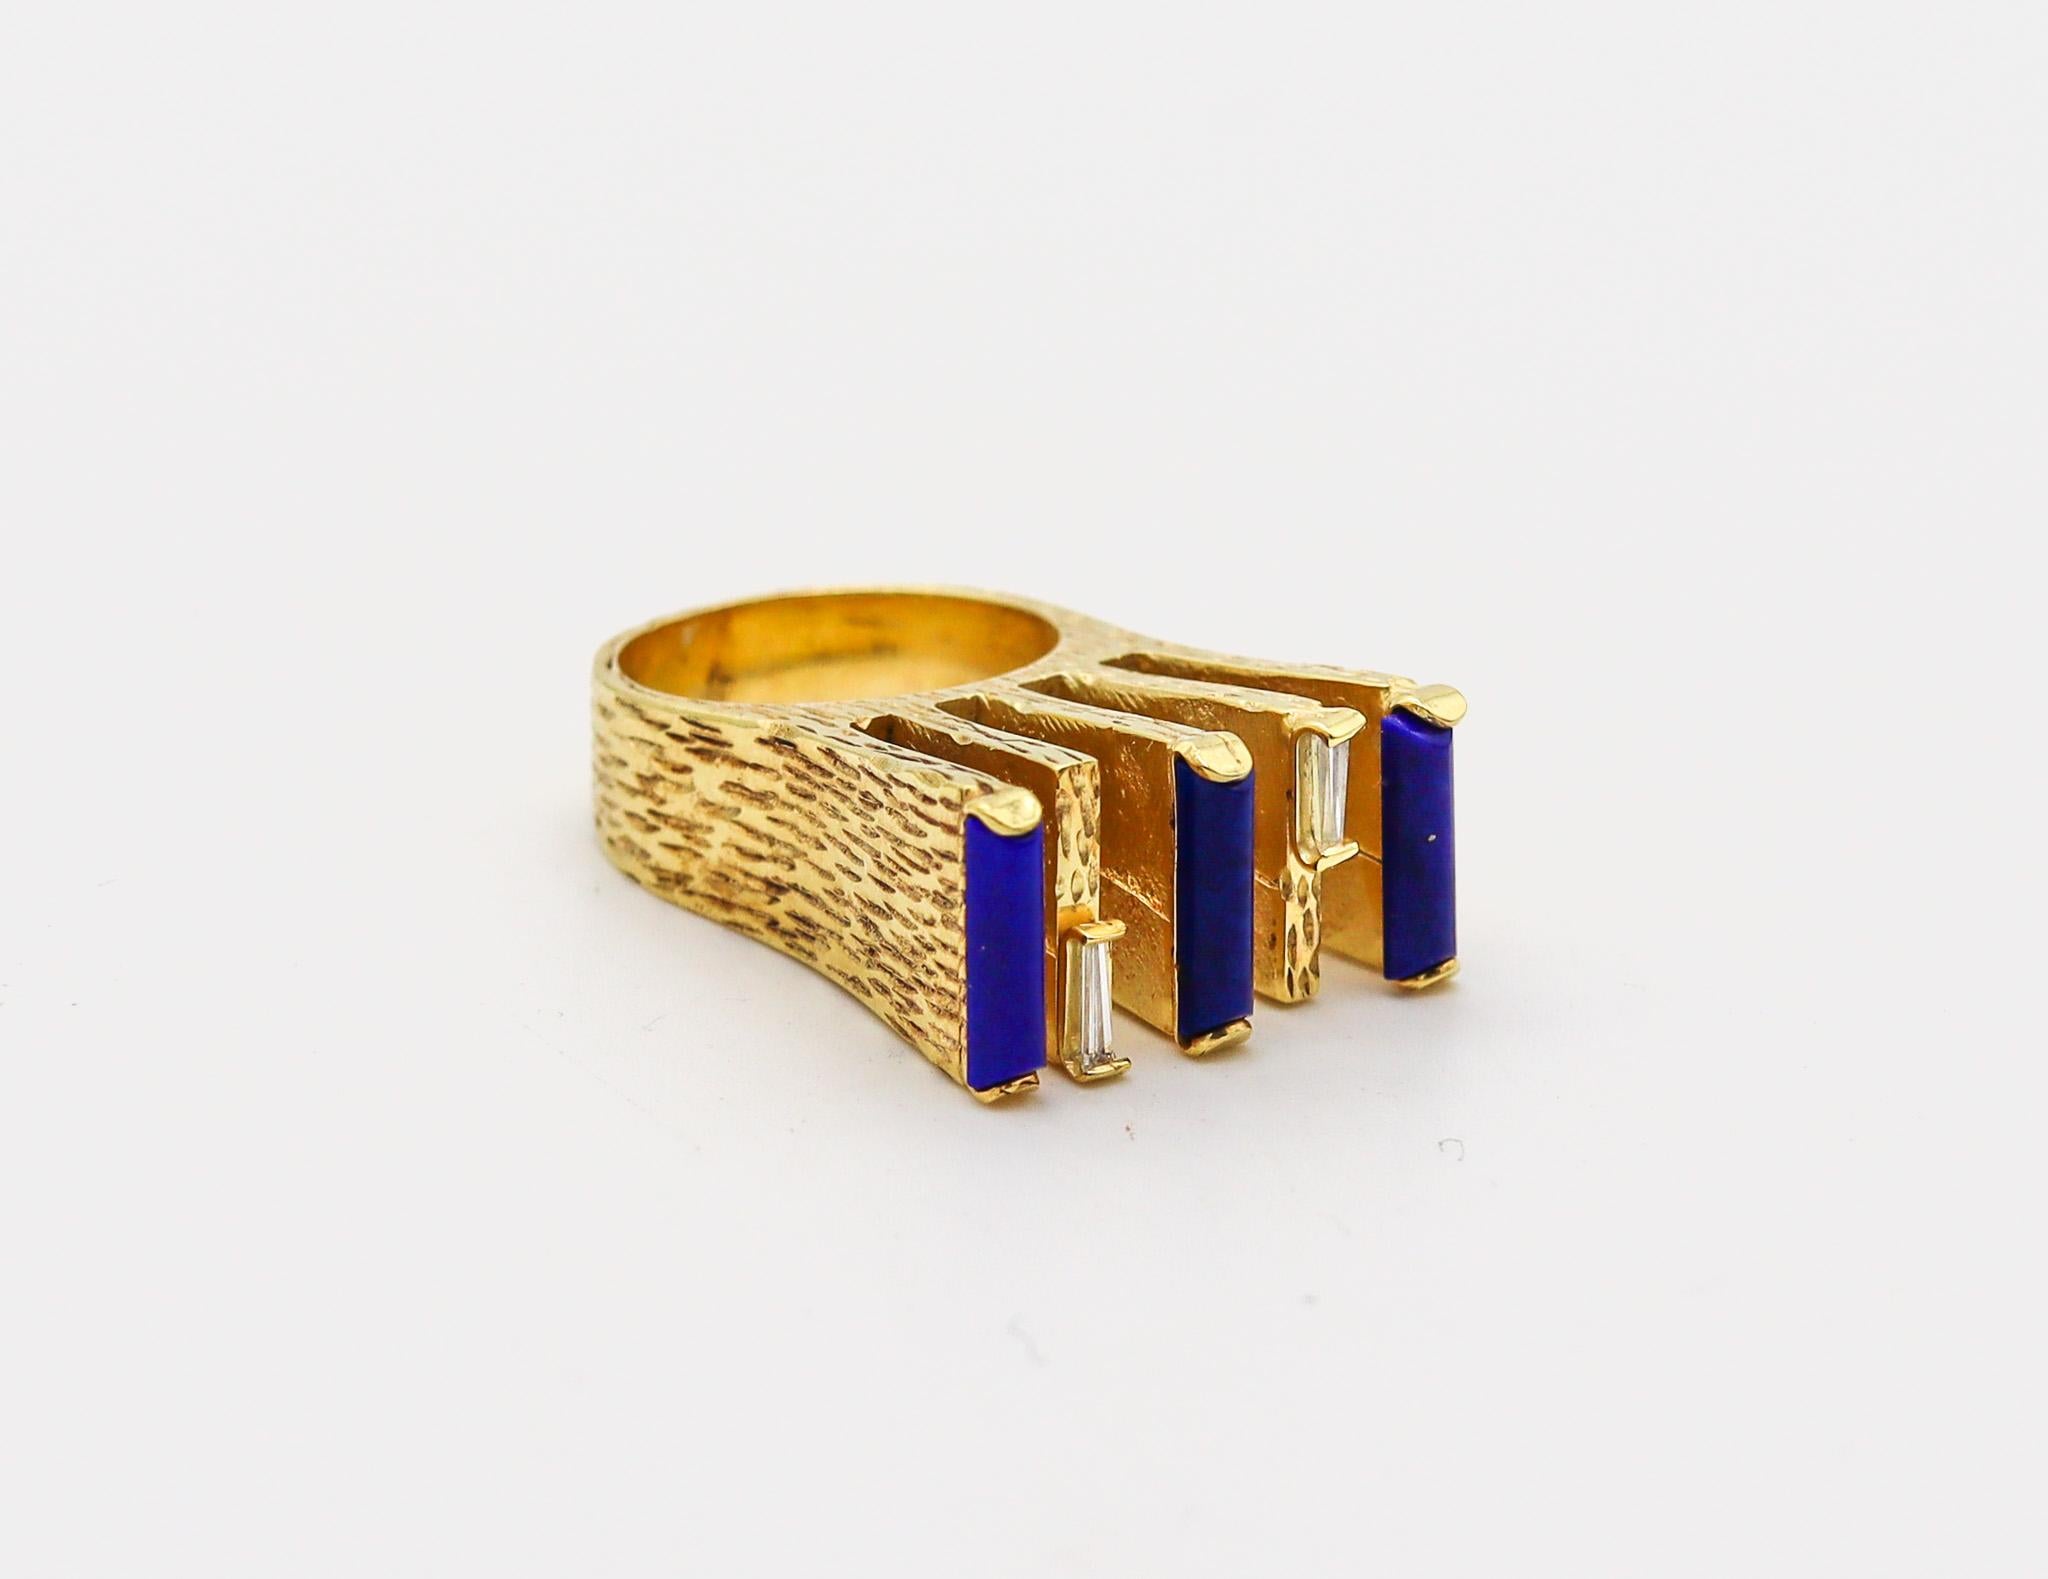 Danish brutalist cocktail ring.

Fabulous studio cocktail ring, created in Denmark back in the 1970's. This ring is very sculptural and was made up with Brutalism art parameters. It was crafted in solid yellow gold of 14 karats with textured finish